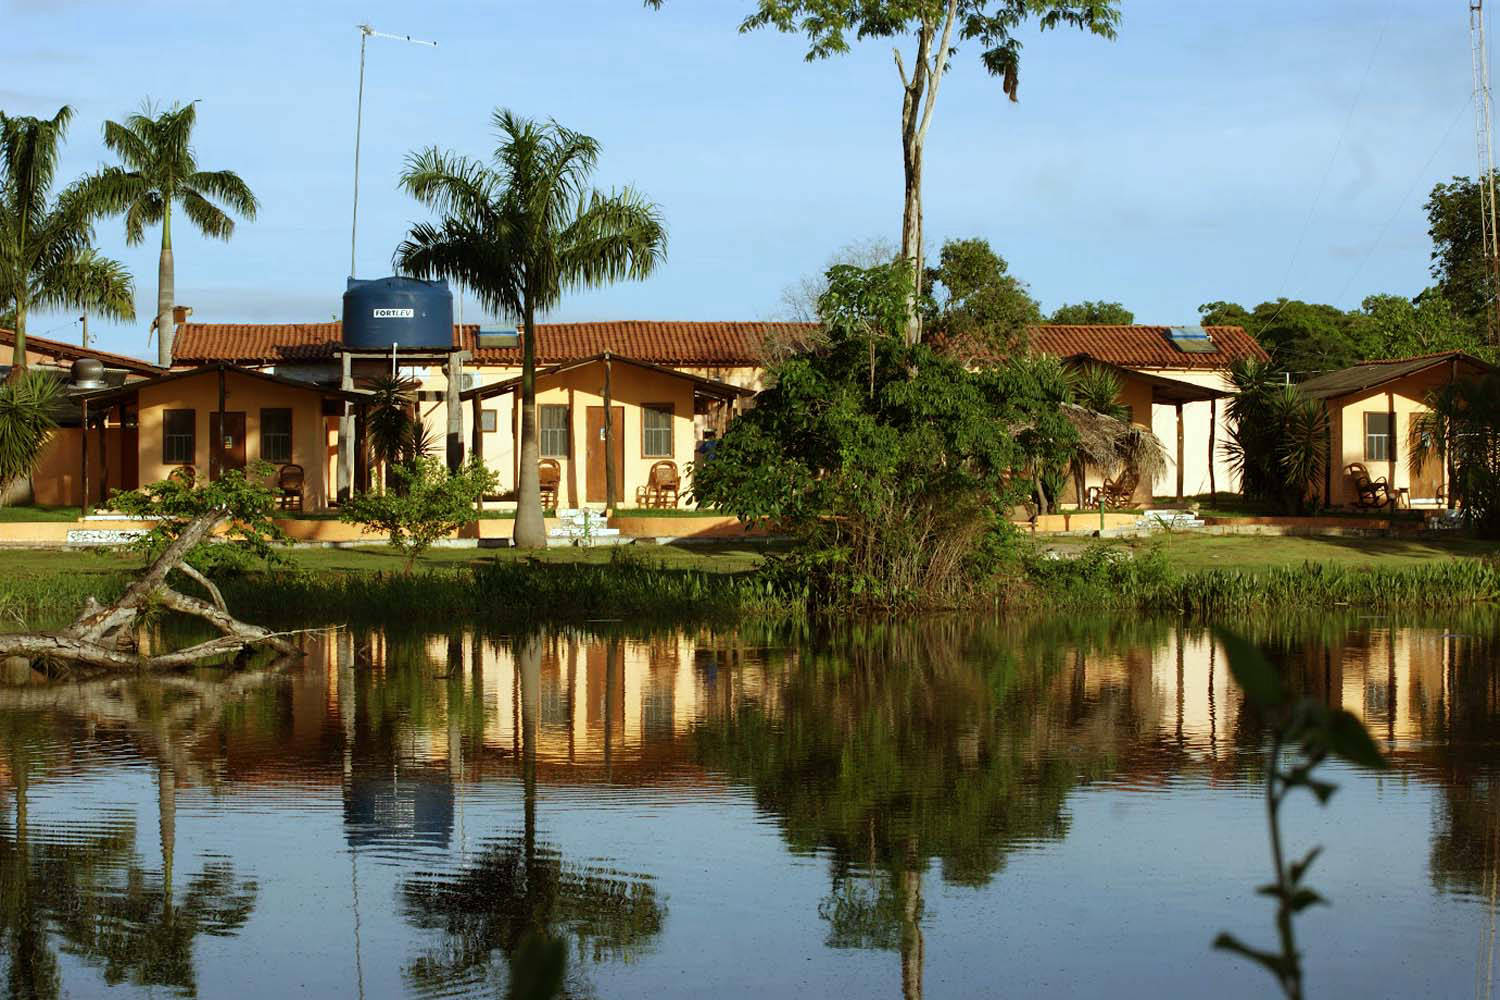 Lake in front of guest houses, hotel complex, bungalows